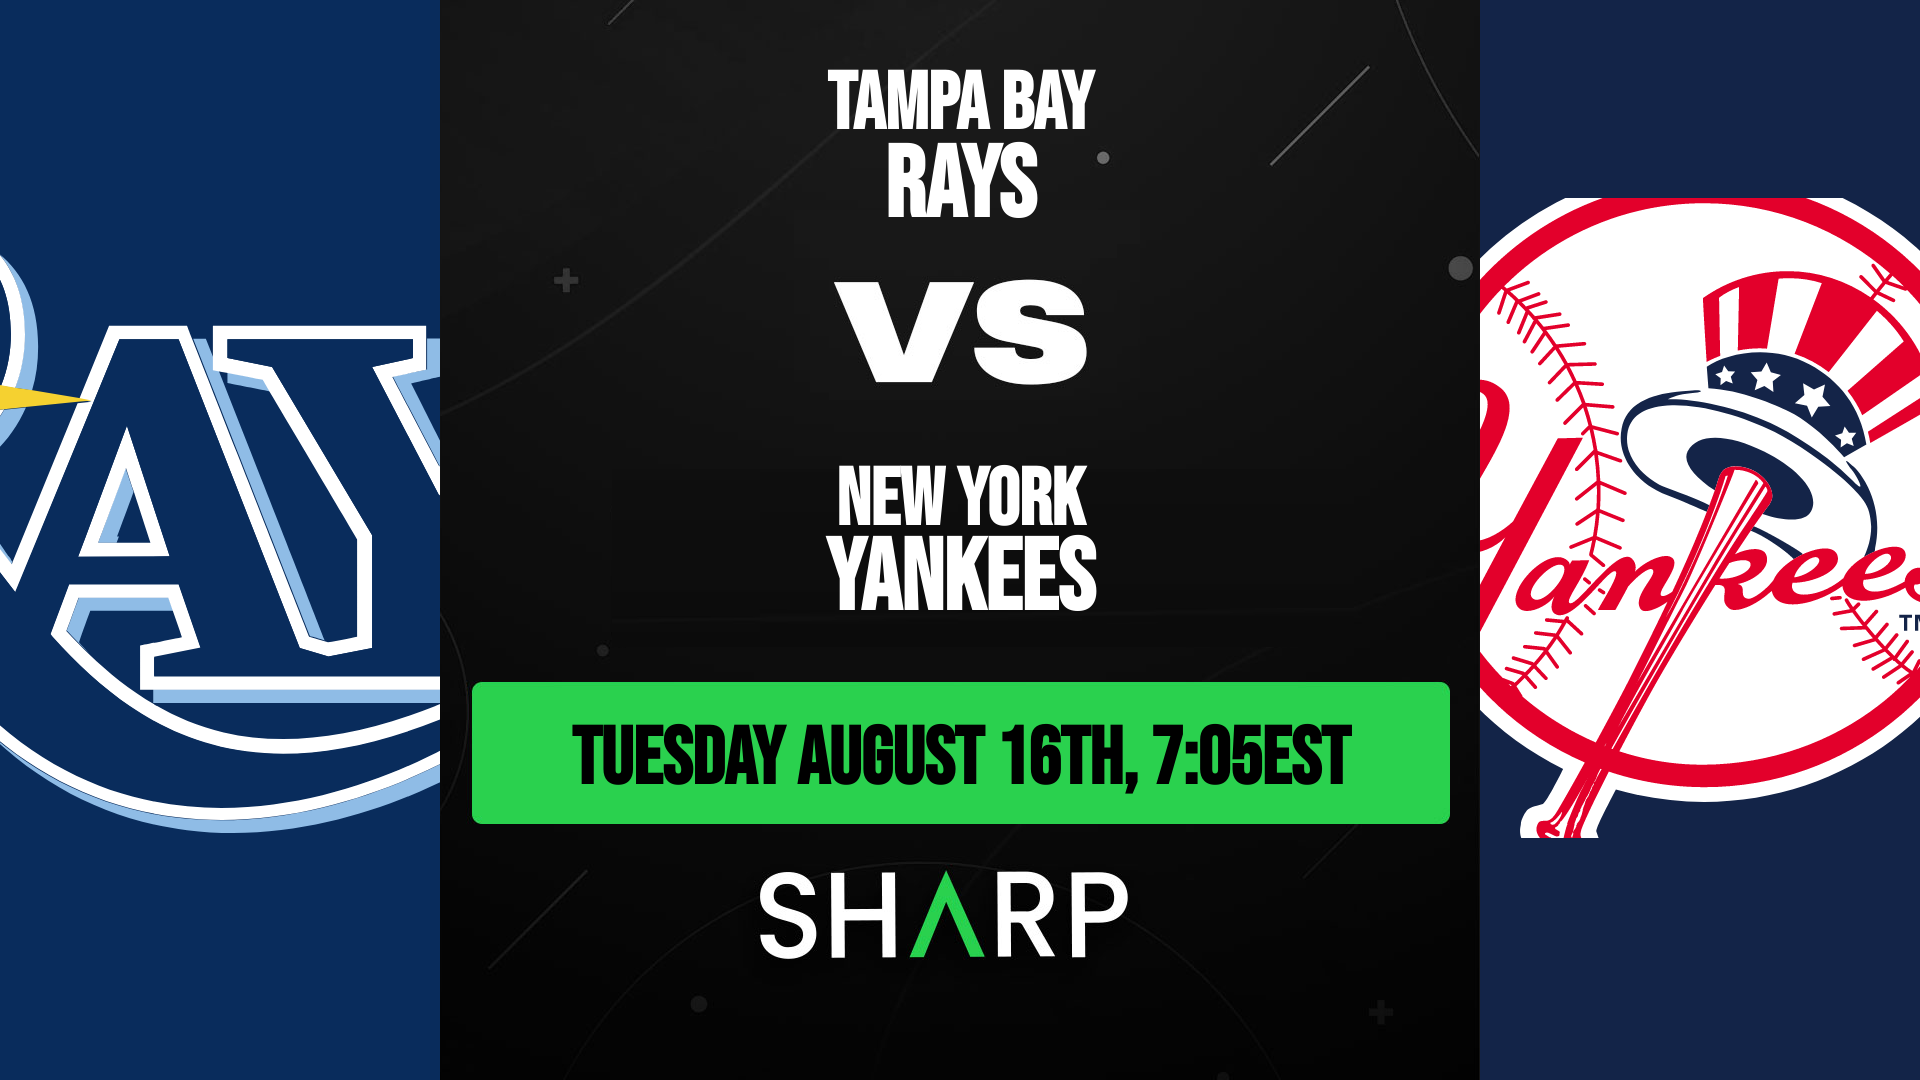 Tampa Bay Rays @ New York Yankees Matchup Preview - August 16th, 2022